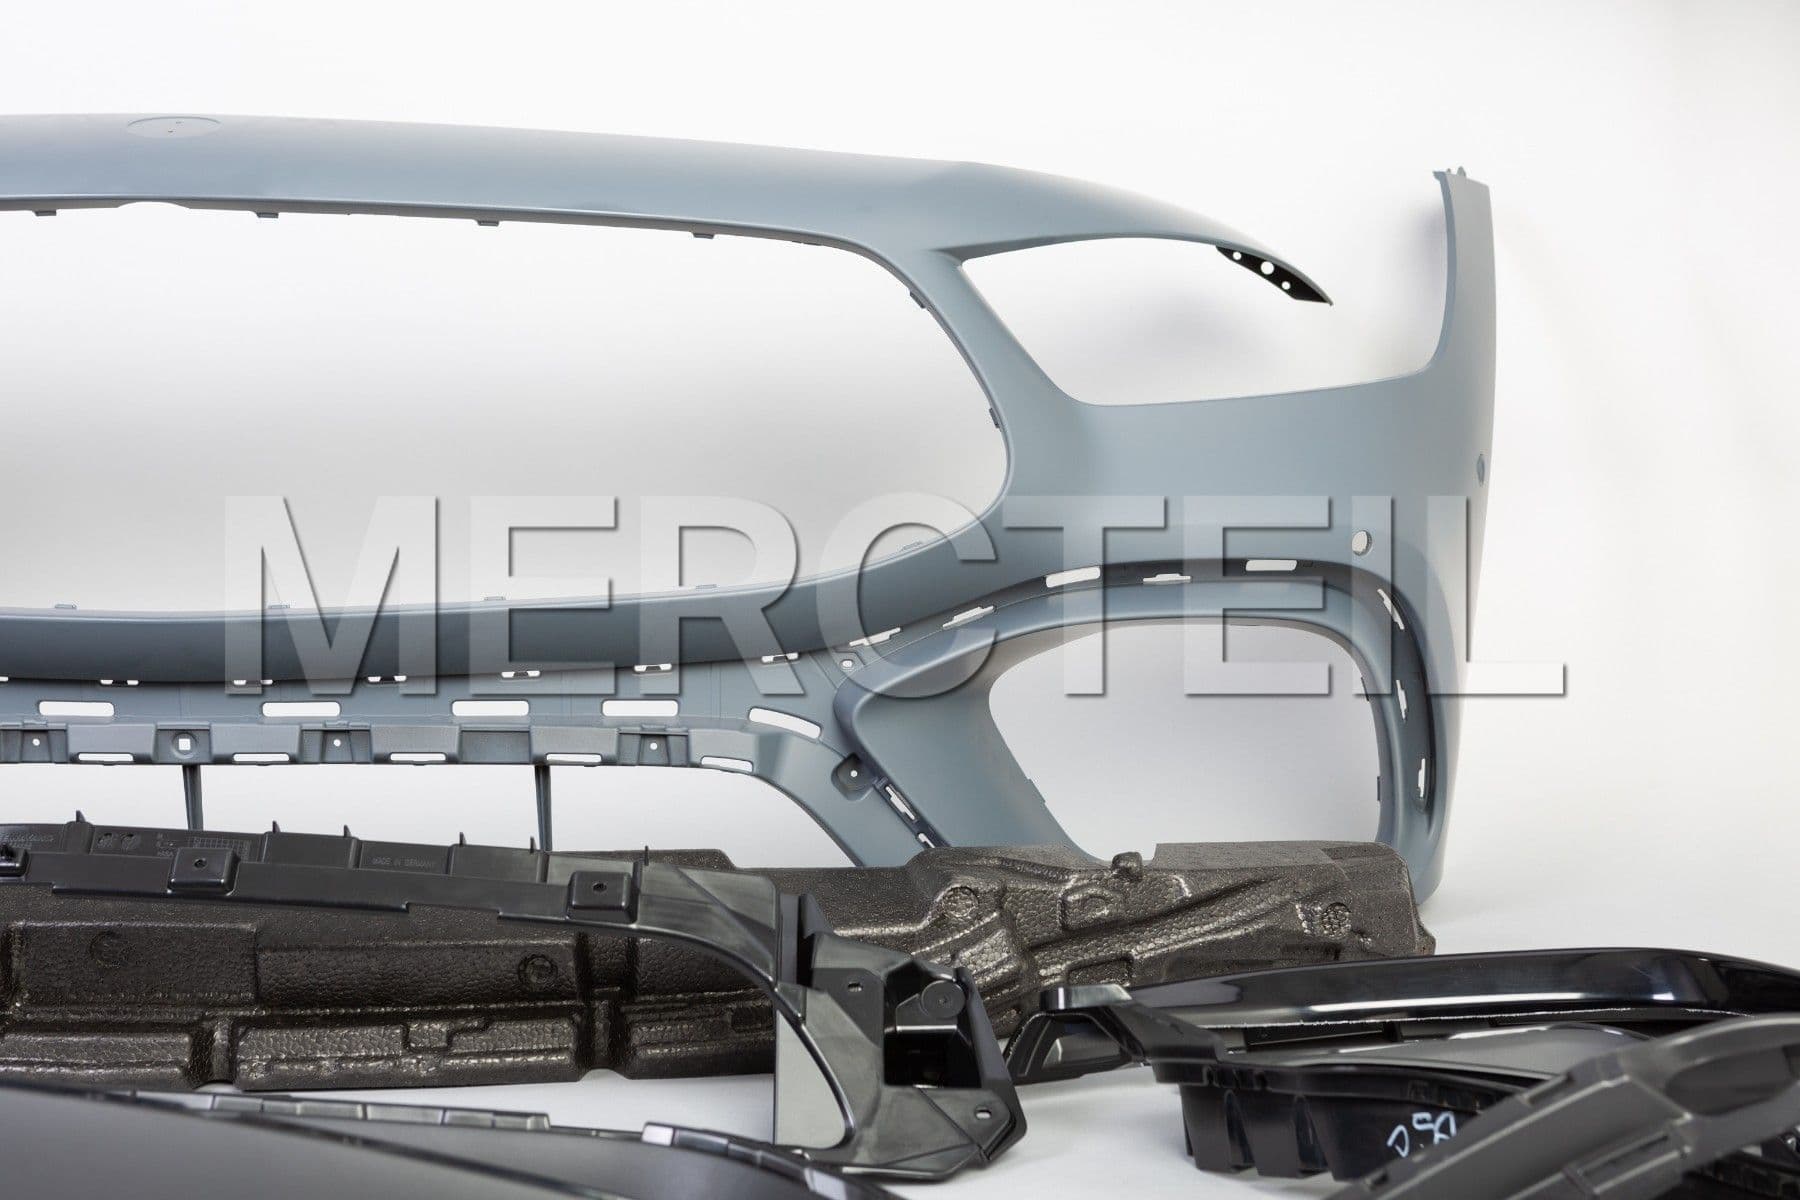 GT63s AMG 4 Door Conversion Kit X290 Genuine Mercedes AMG (part number: 	
A2908854901)